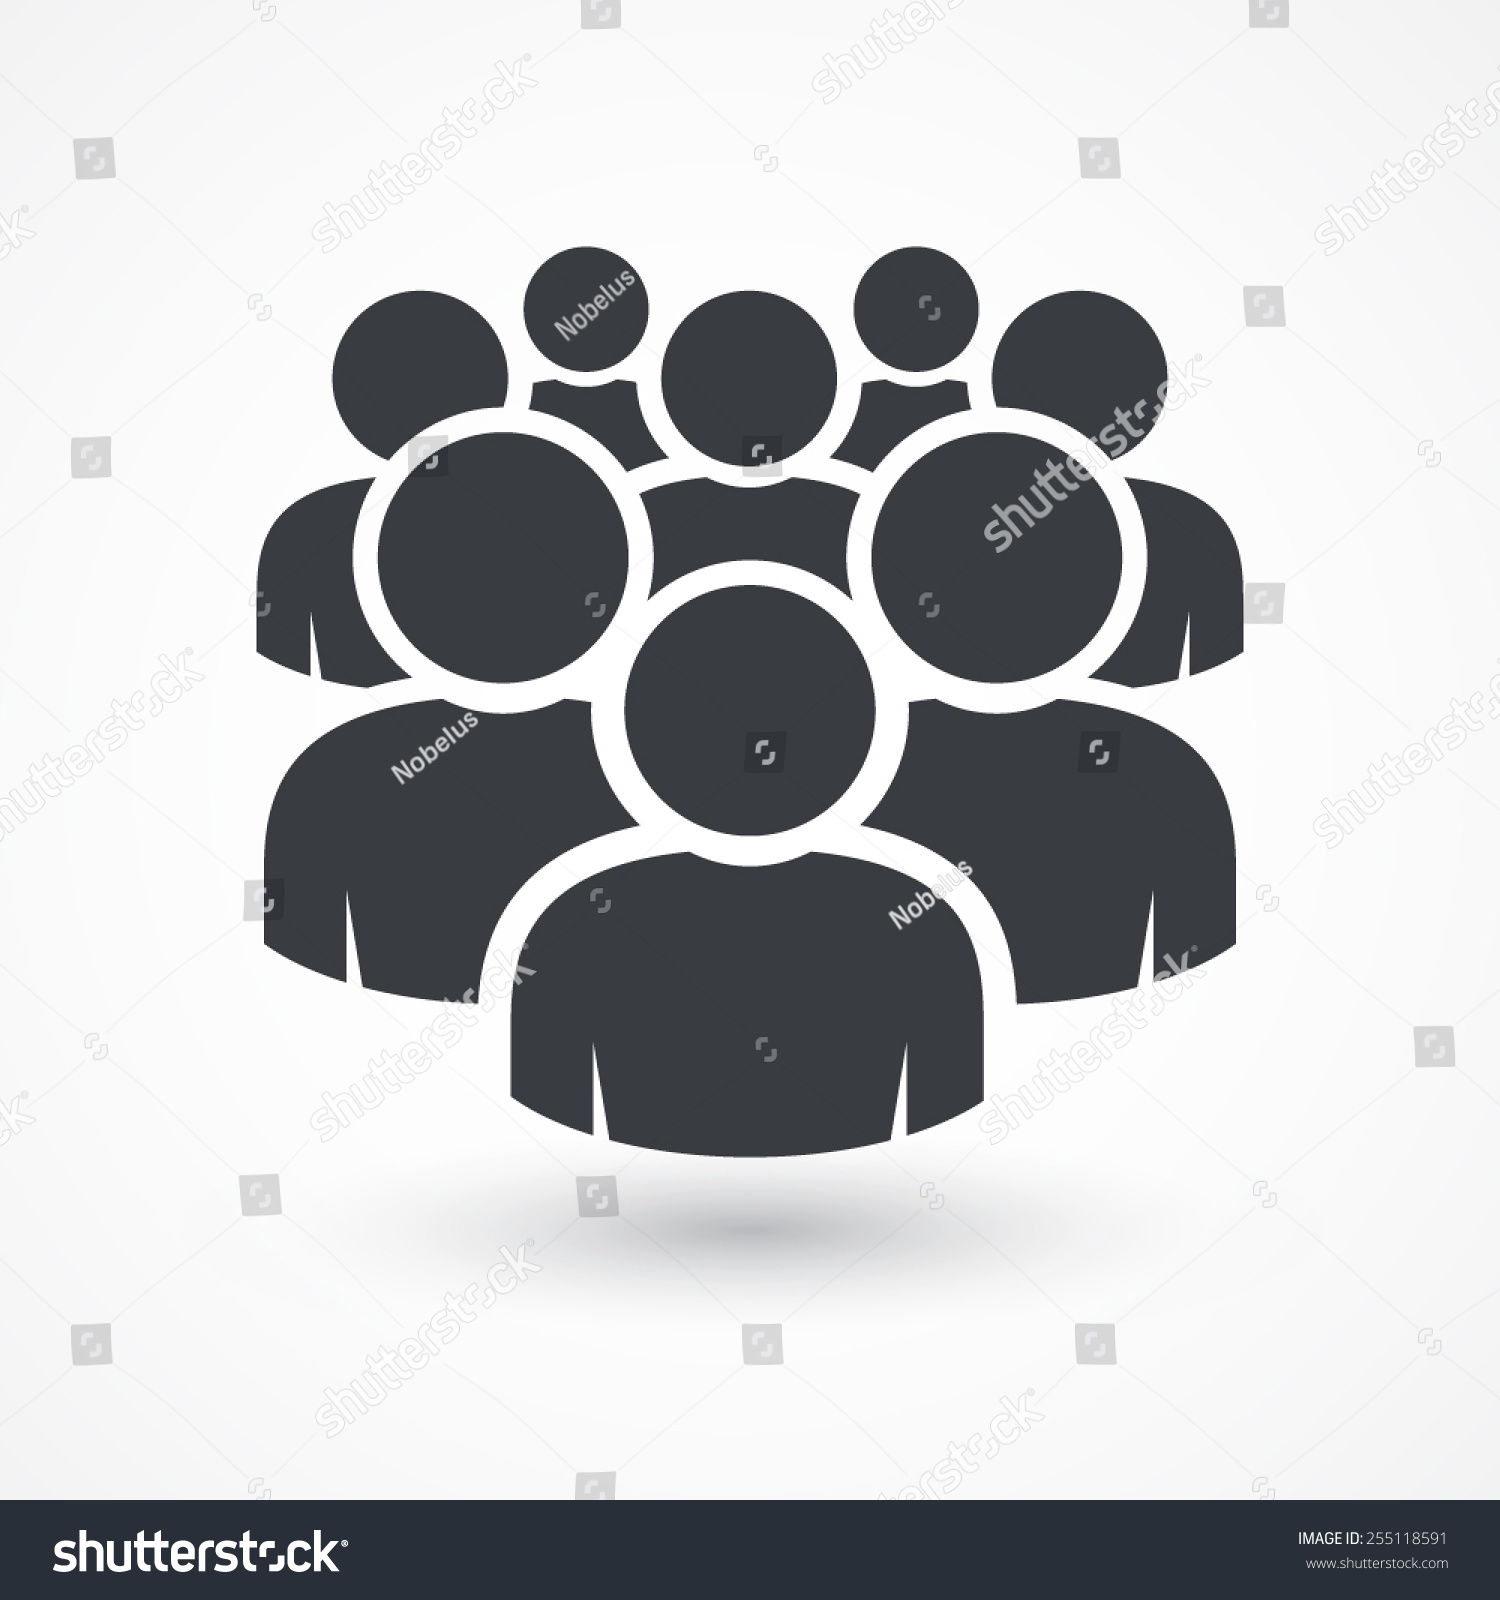 Illustration of crowd of people icon silhouettes vector. Social icon. Flat style design. User group network. Corporate team group. Community member icon. Business team work activity. Staff unity icon  #255118591